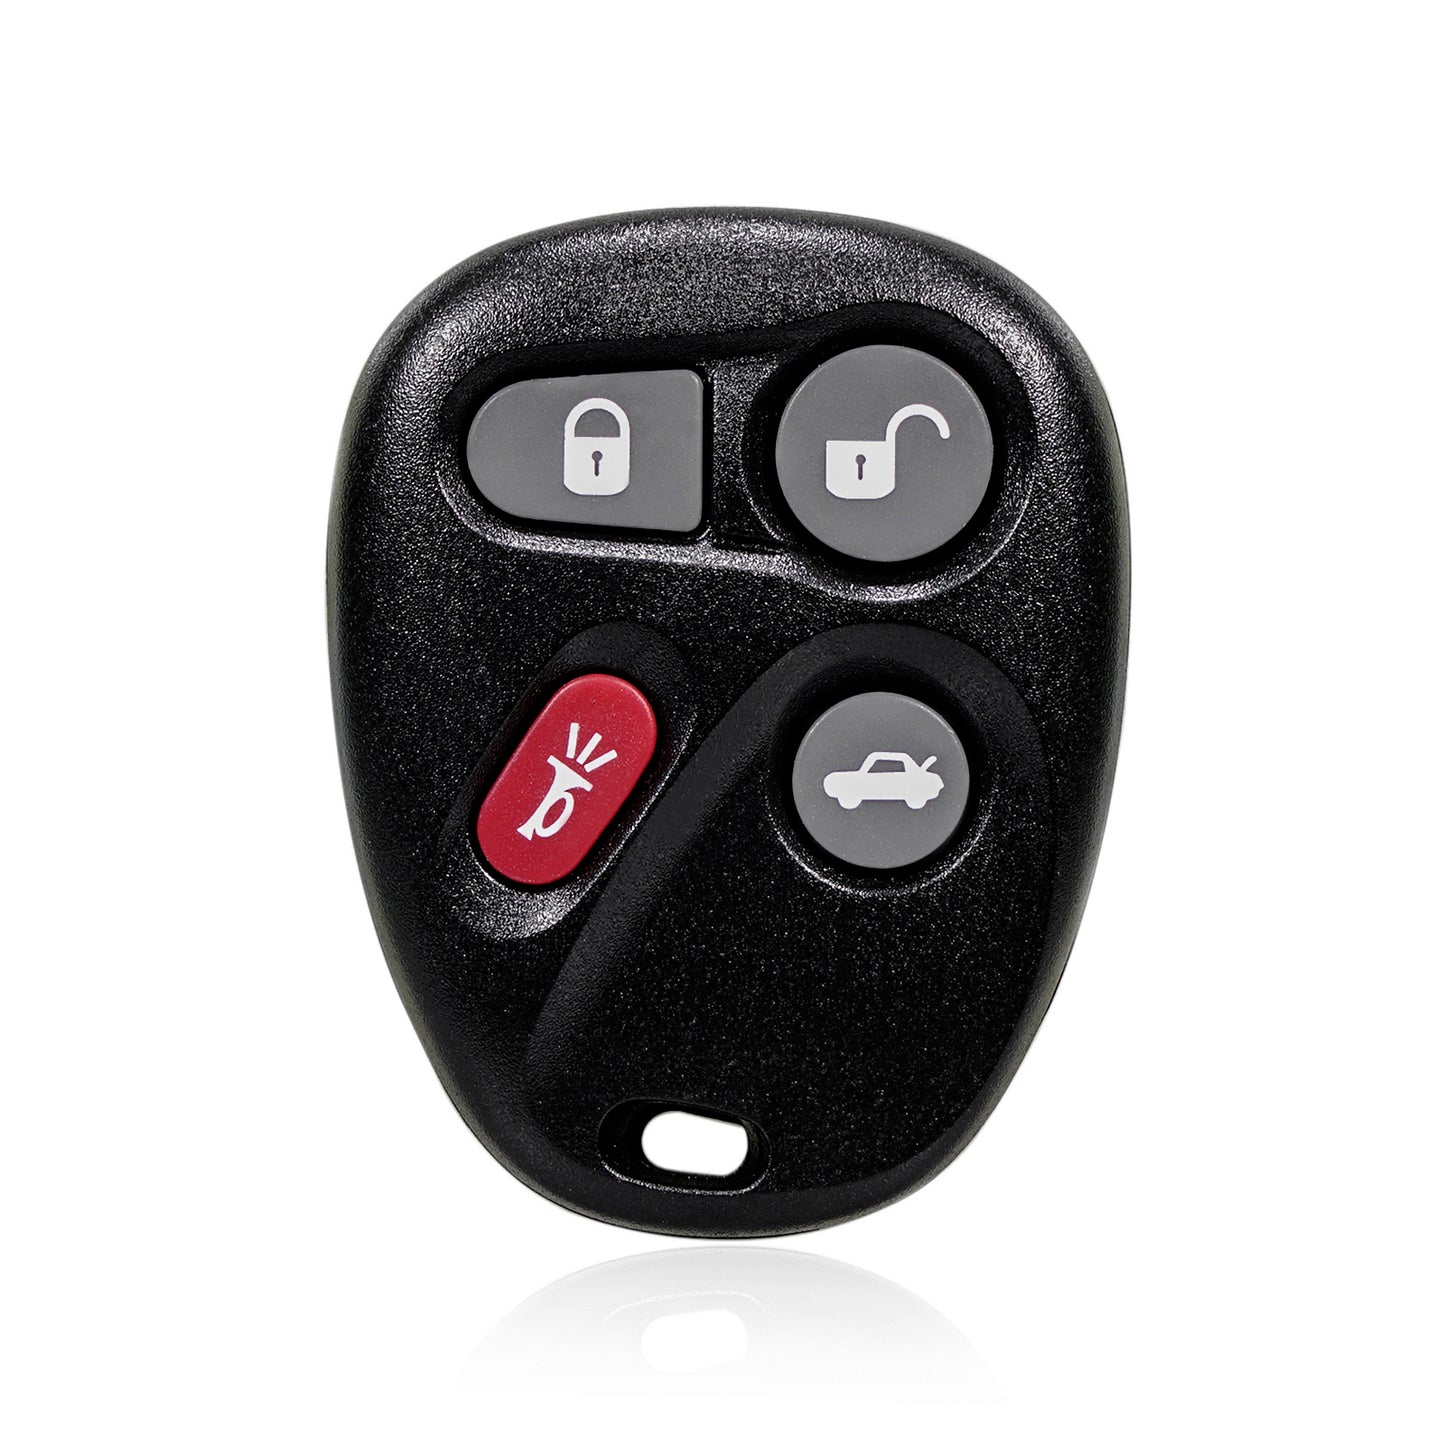 4 Buttons 315MHz Keyless Entry Fob Remote Car Key For 2000-2011 Chevrolet Malibu (2 possible remotes, must match GM part) Cavalier FCC ID: L2C0005T SKU : J254